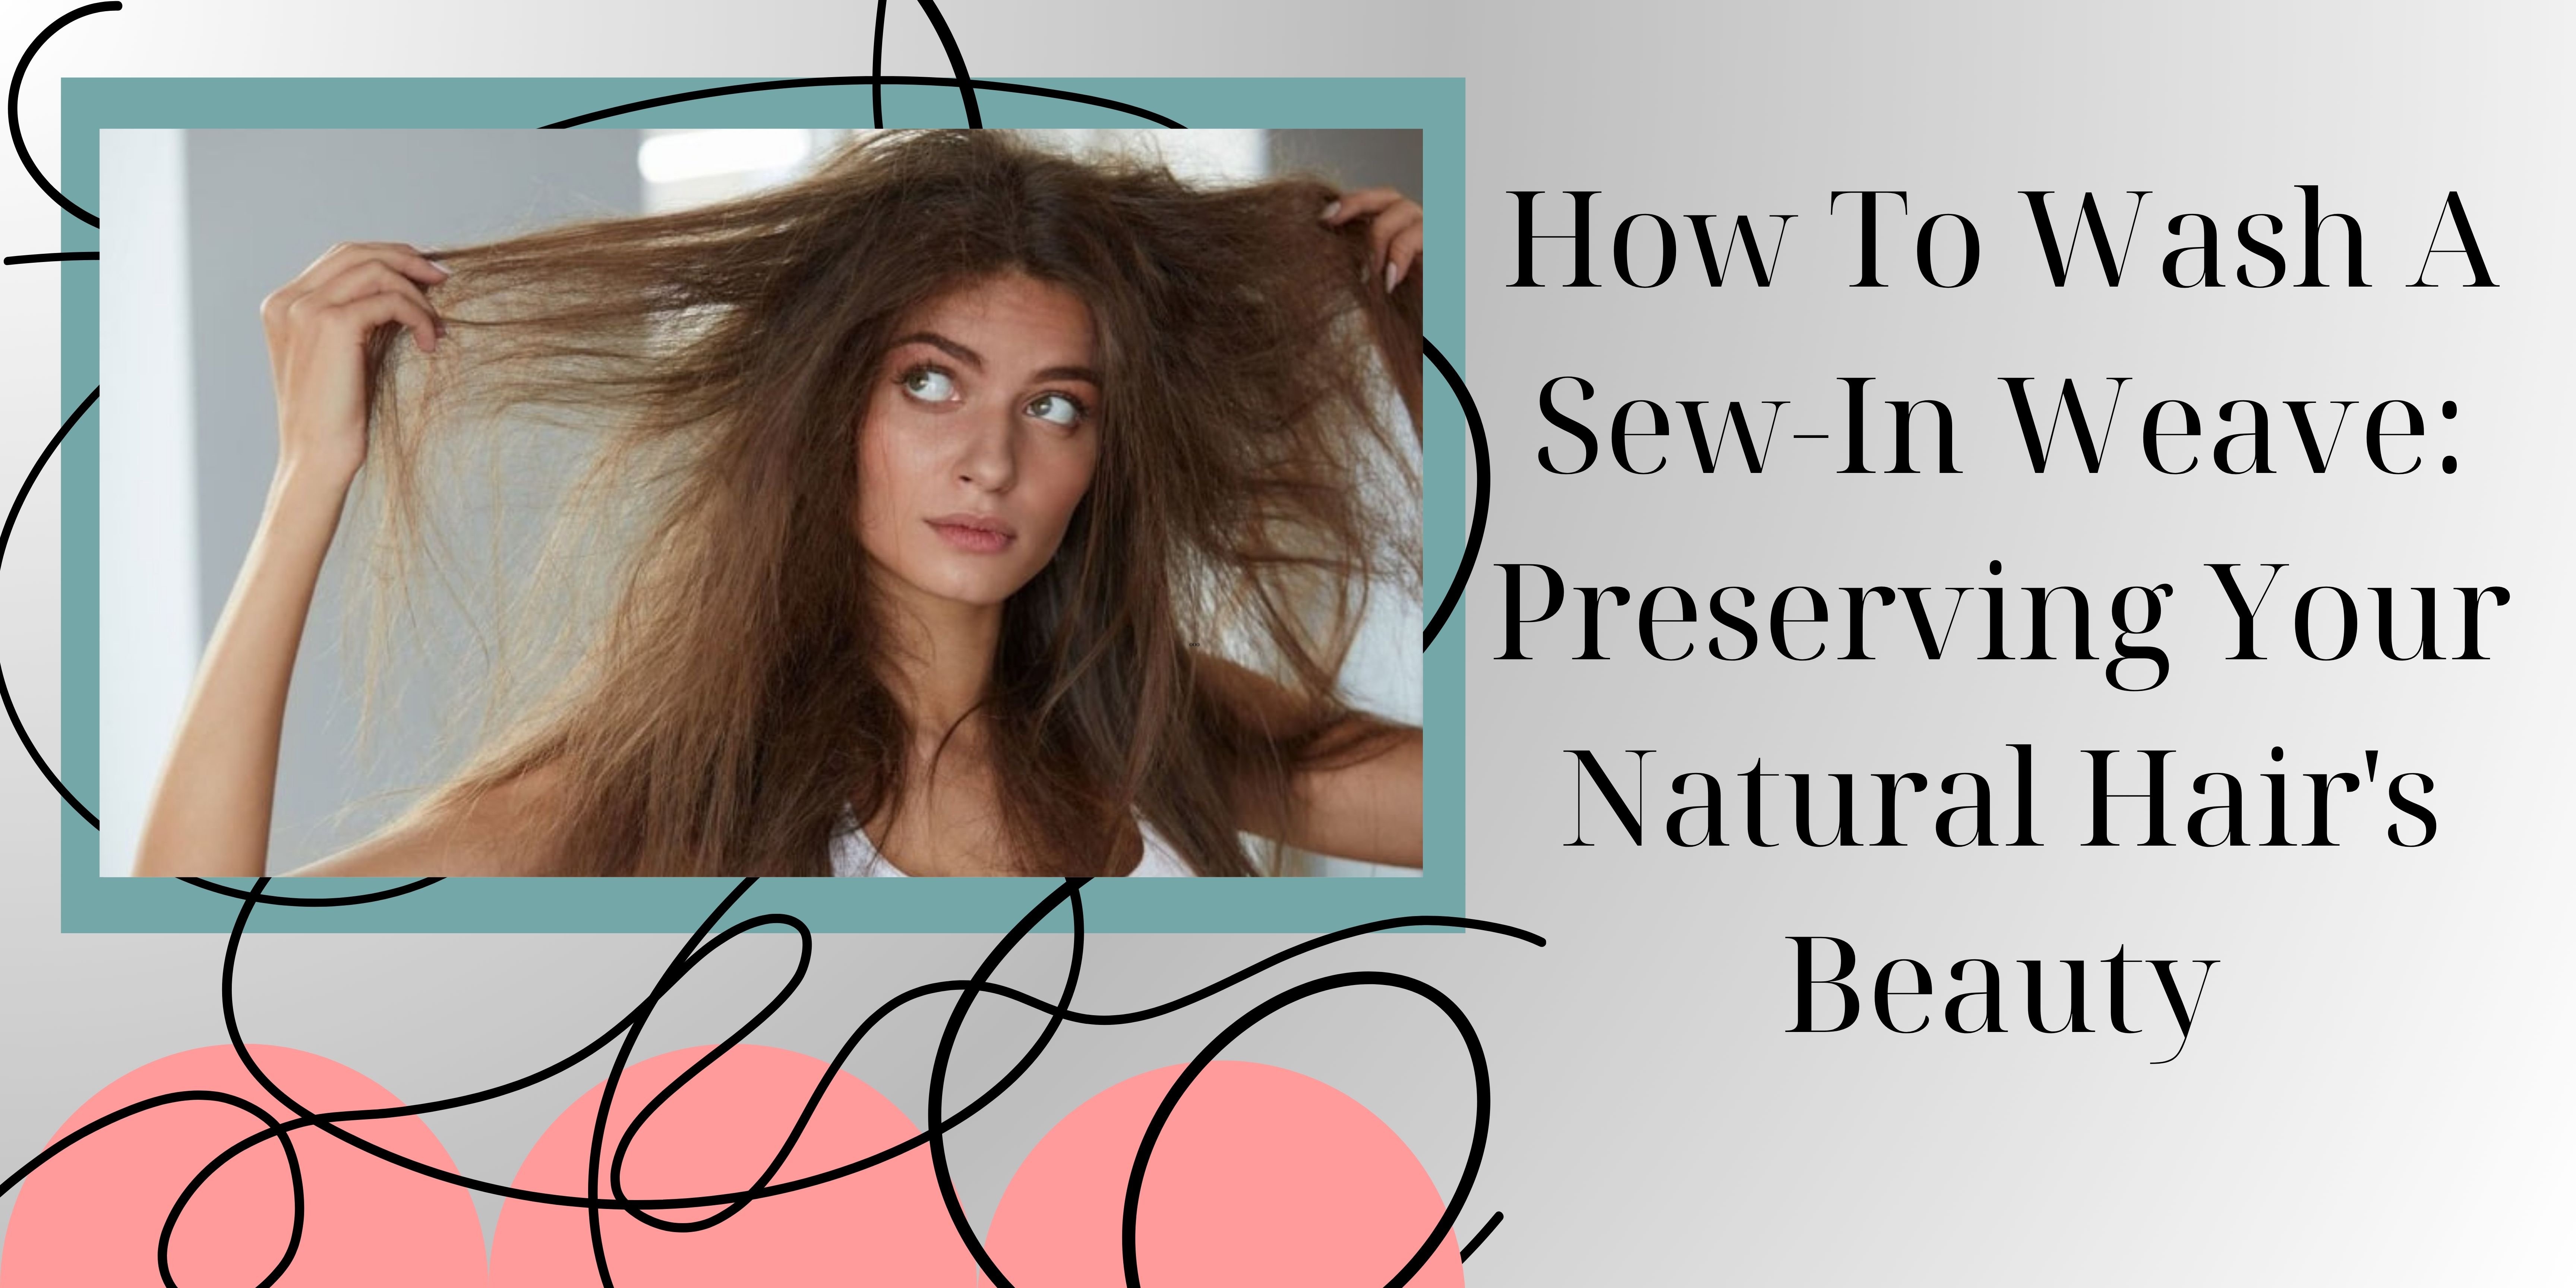 How to Wash a Sew-In Weave: Preserving Your Natural Hair's Beauty